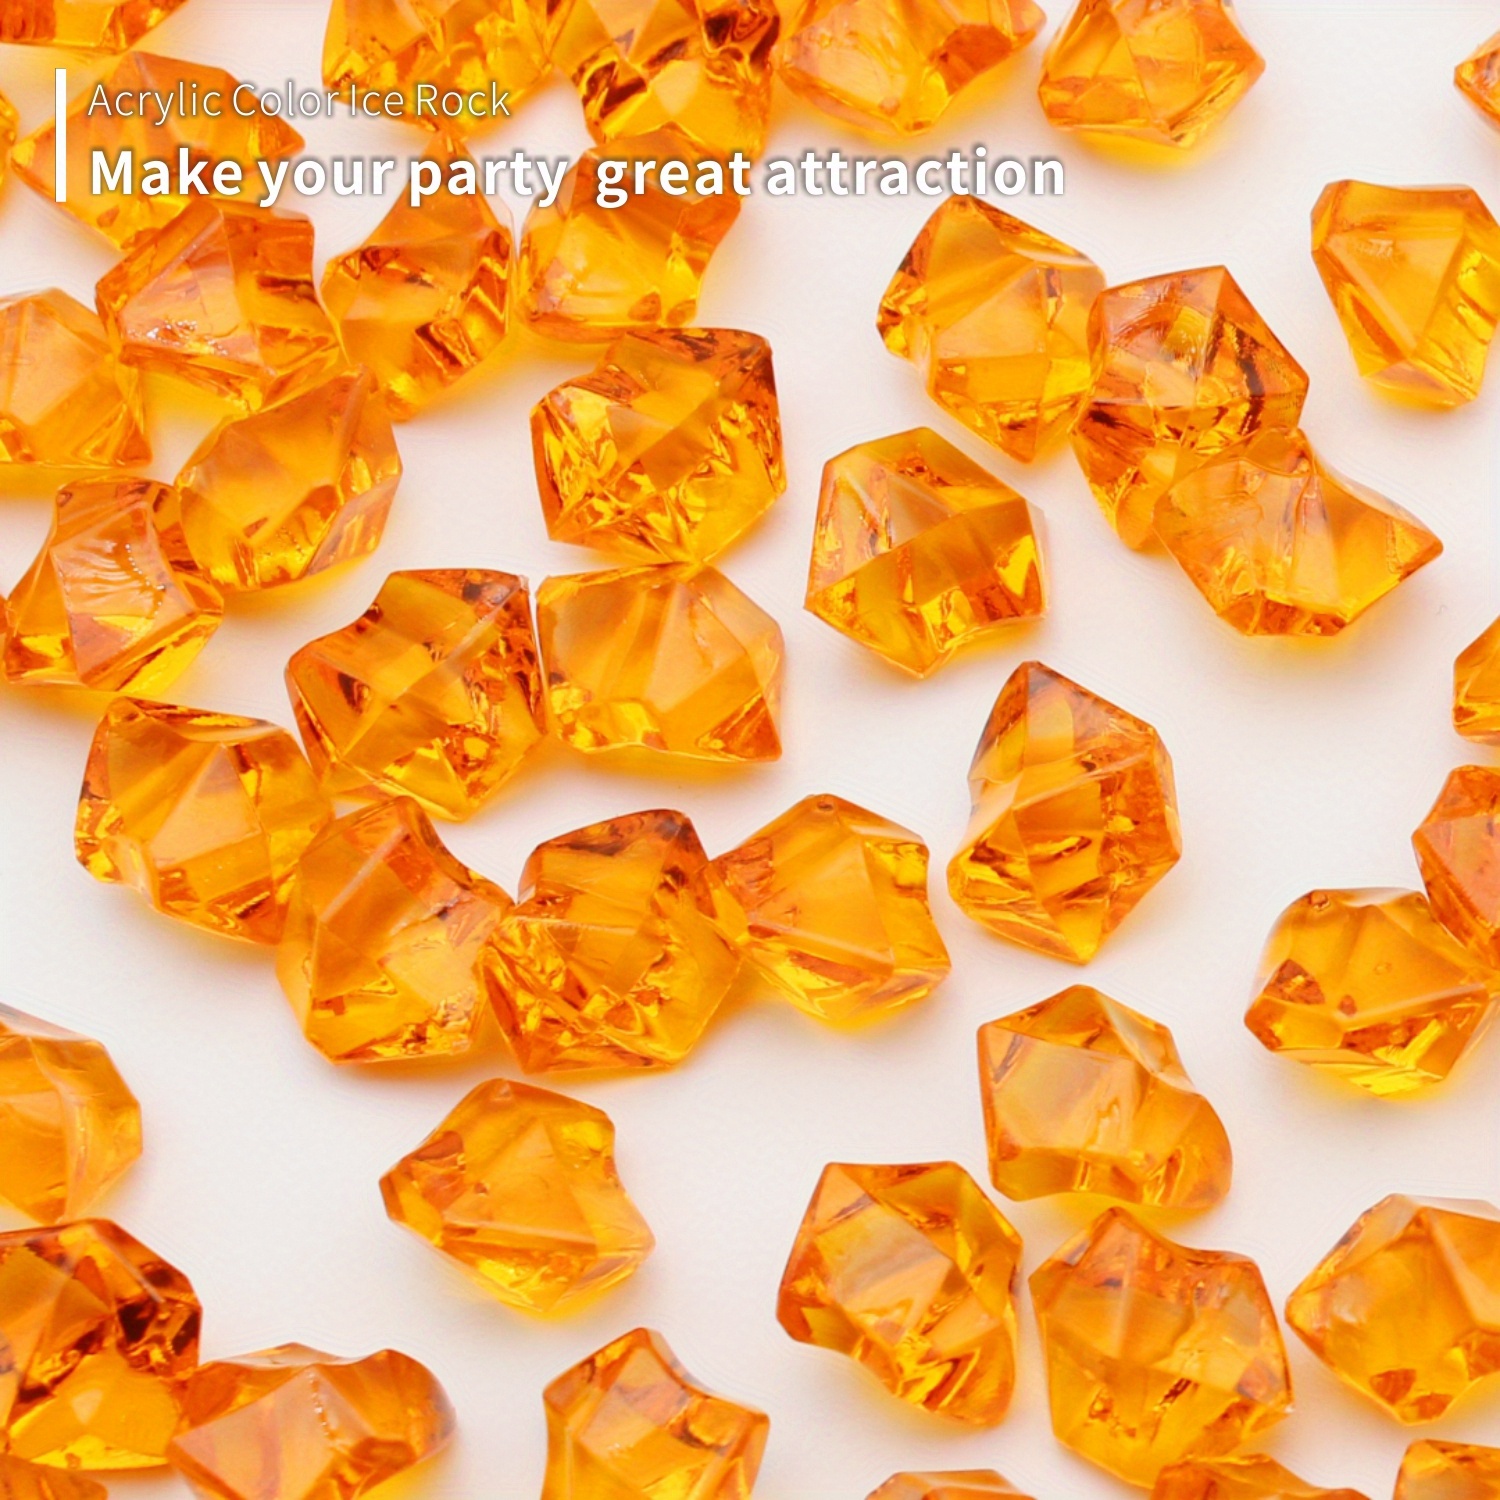 Mega Crafts - 1/2 lb Acrylic Gemstones Orange | Plastic Glass Gems for Arts and Crafts, Vase Fillers and Table Scatters, Decoration Stones, Shiny